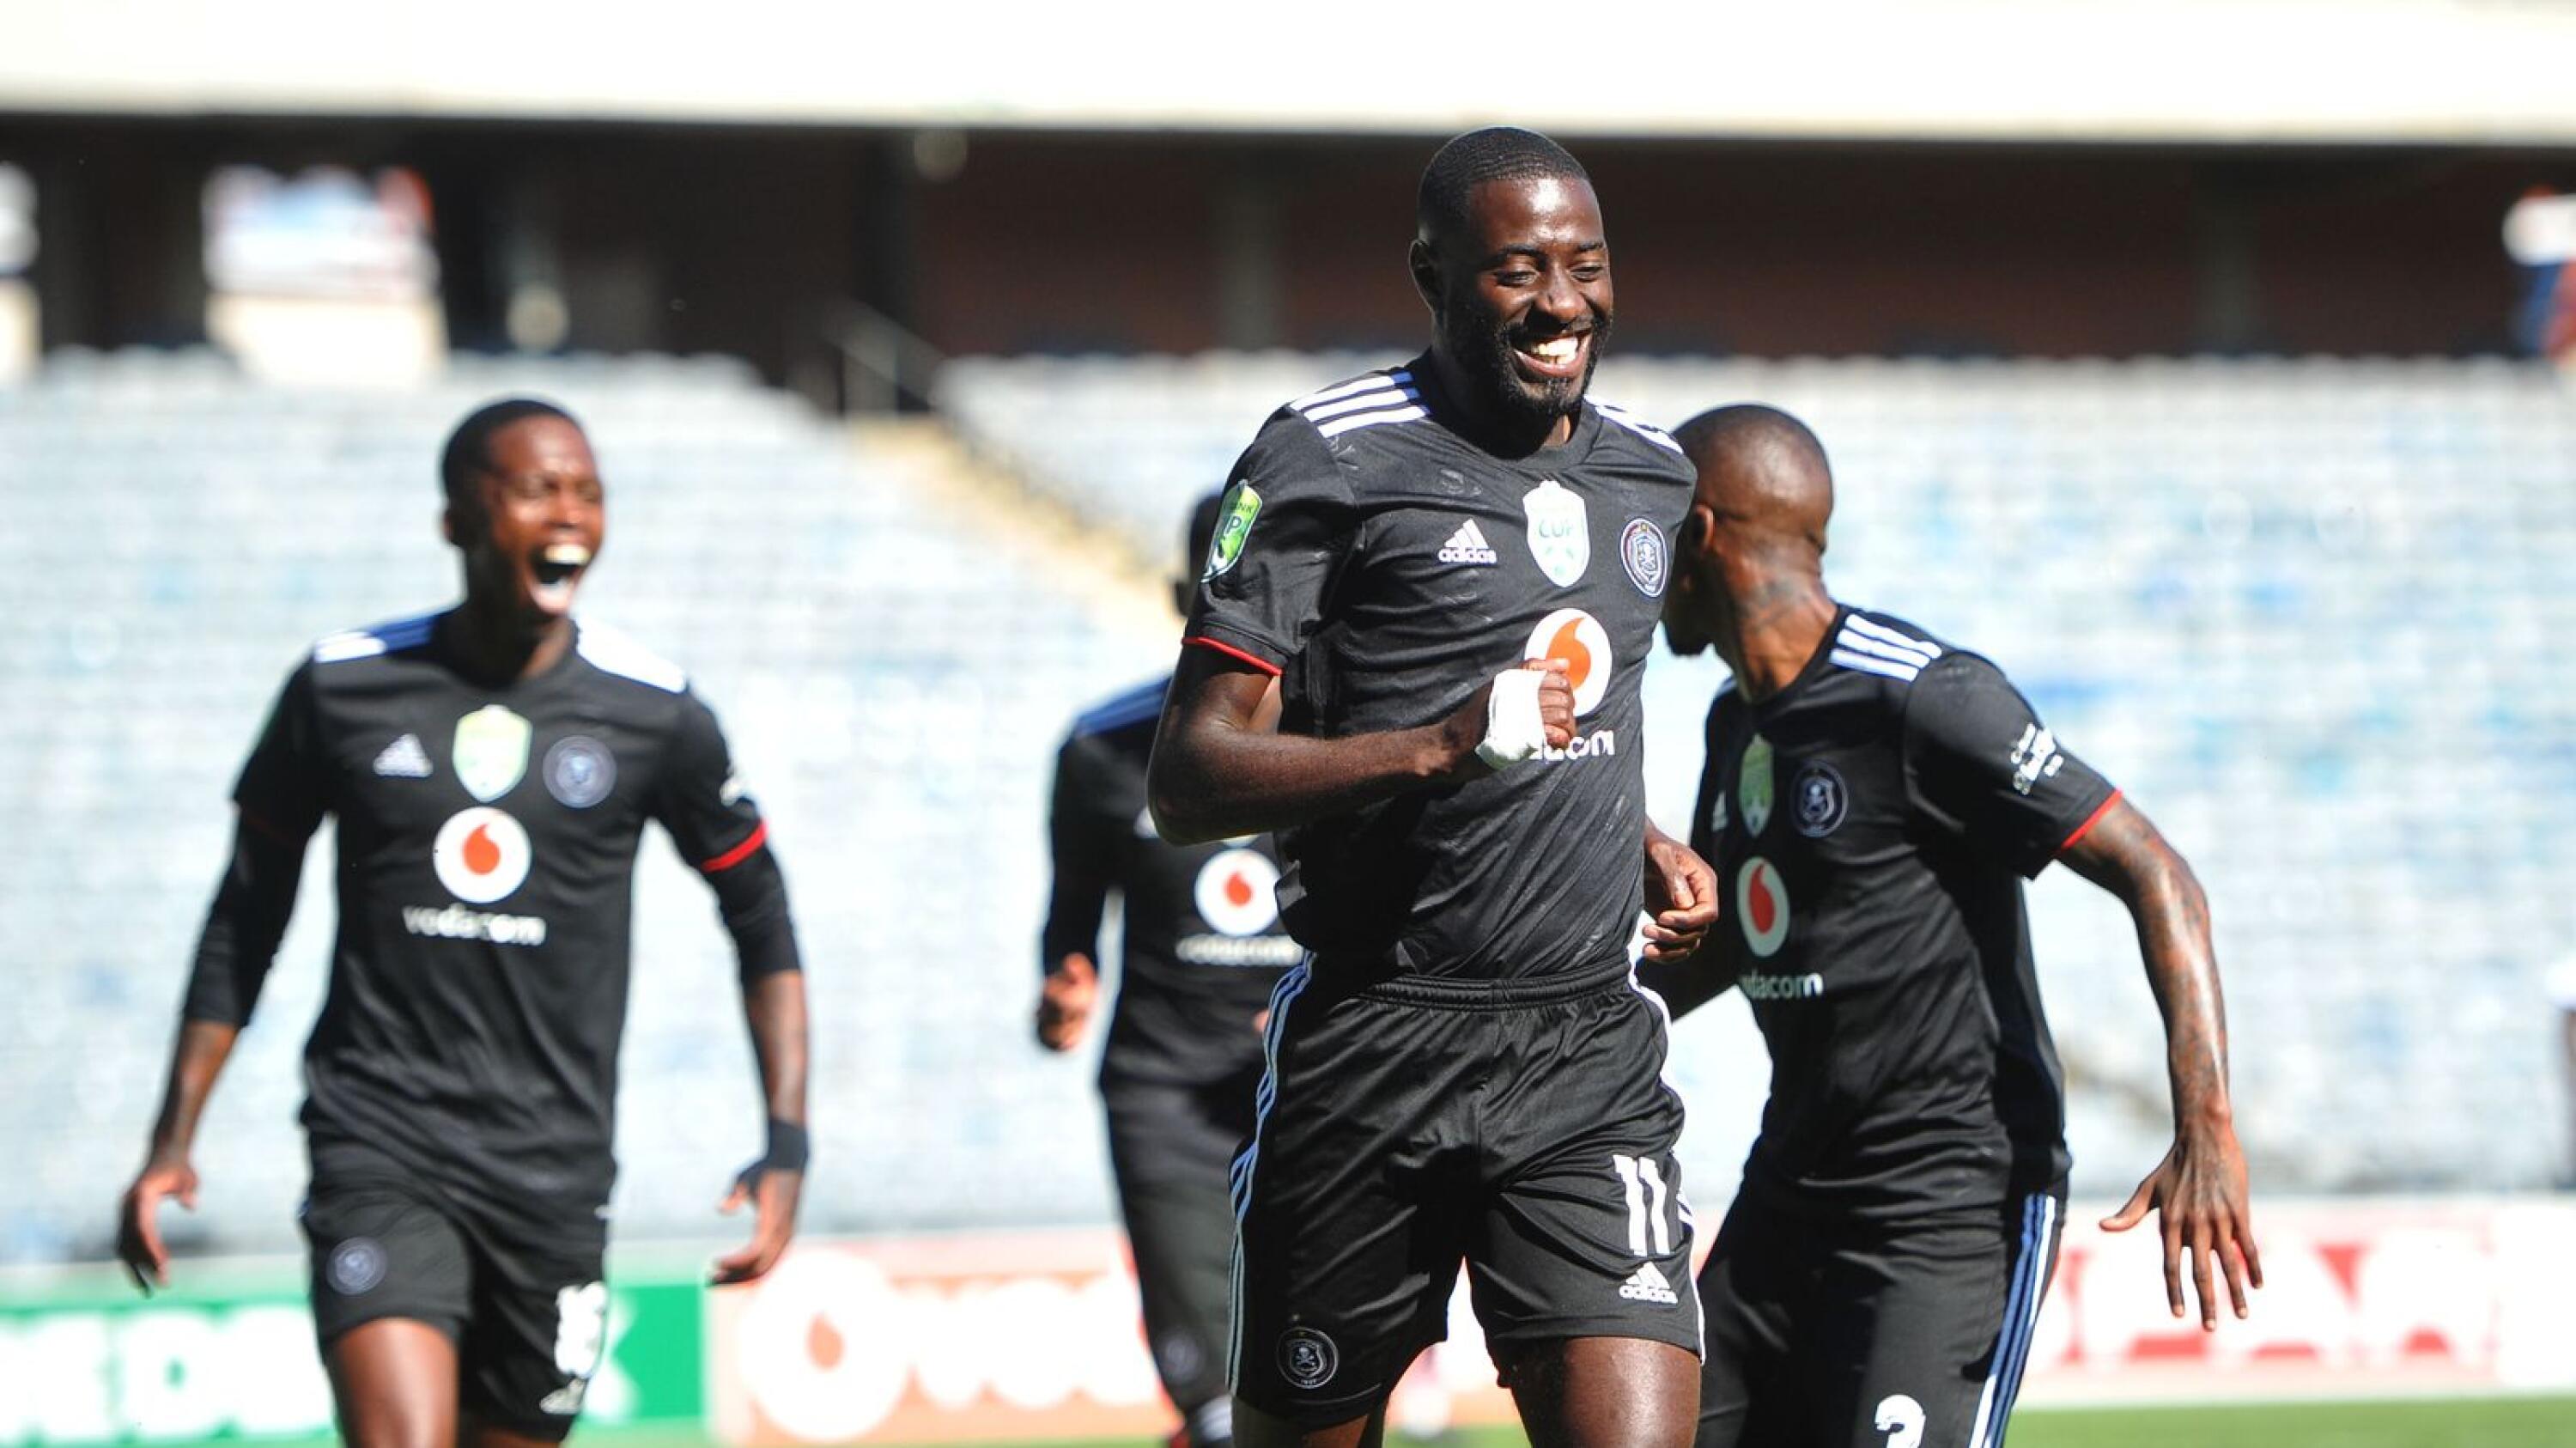 Deon Hotto of Orlando Pirates celebrates with teammates after scoring the winning goal during the Nedbank Cup Last 32 match against AmaZulu at Orlando Stadium in Soweto, Johannesburg on Sunday